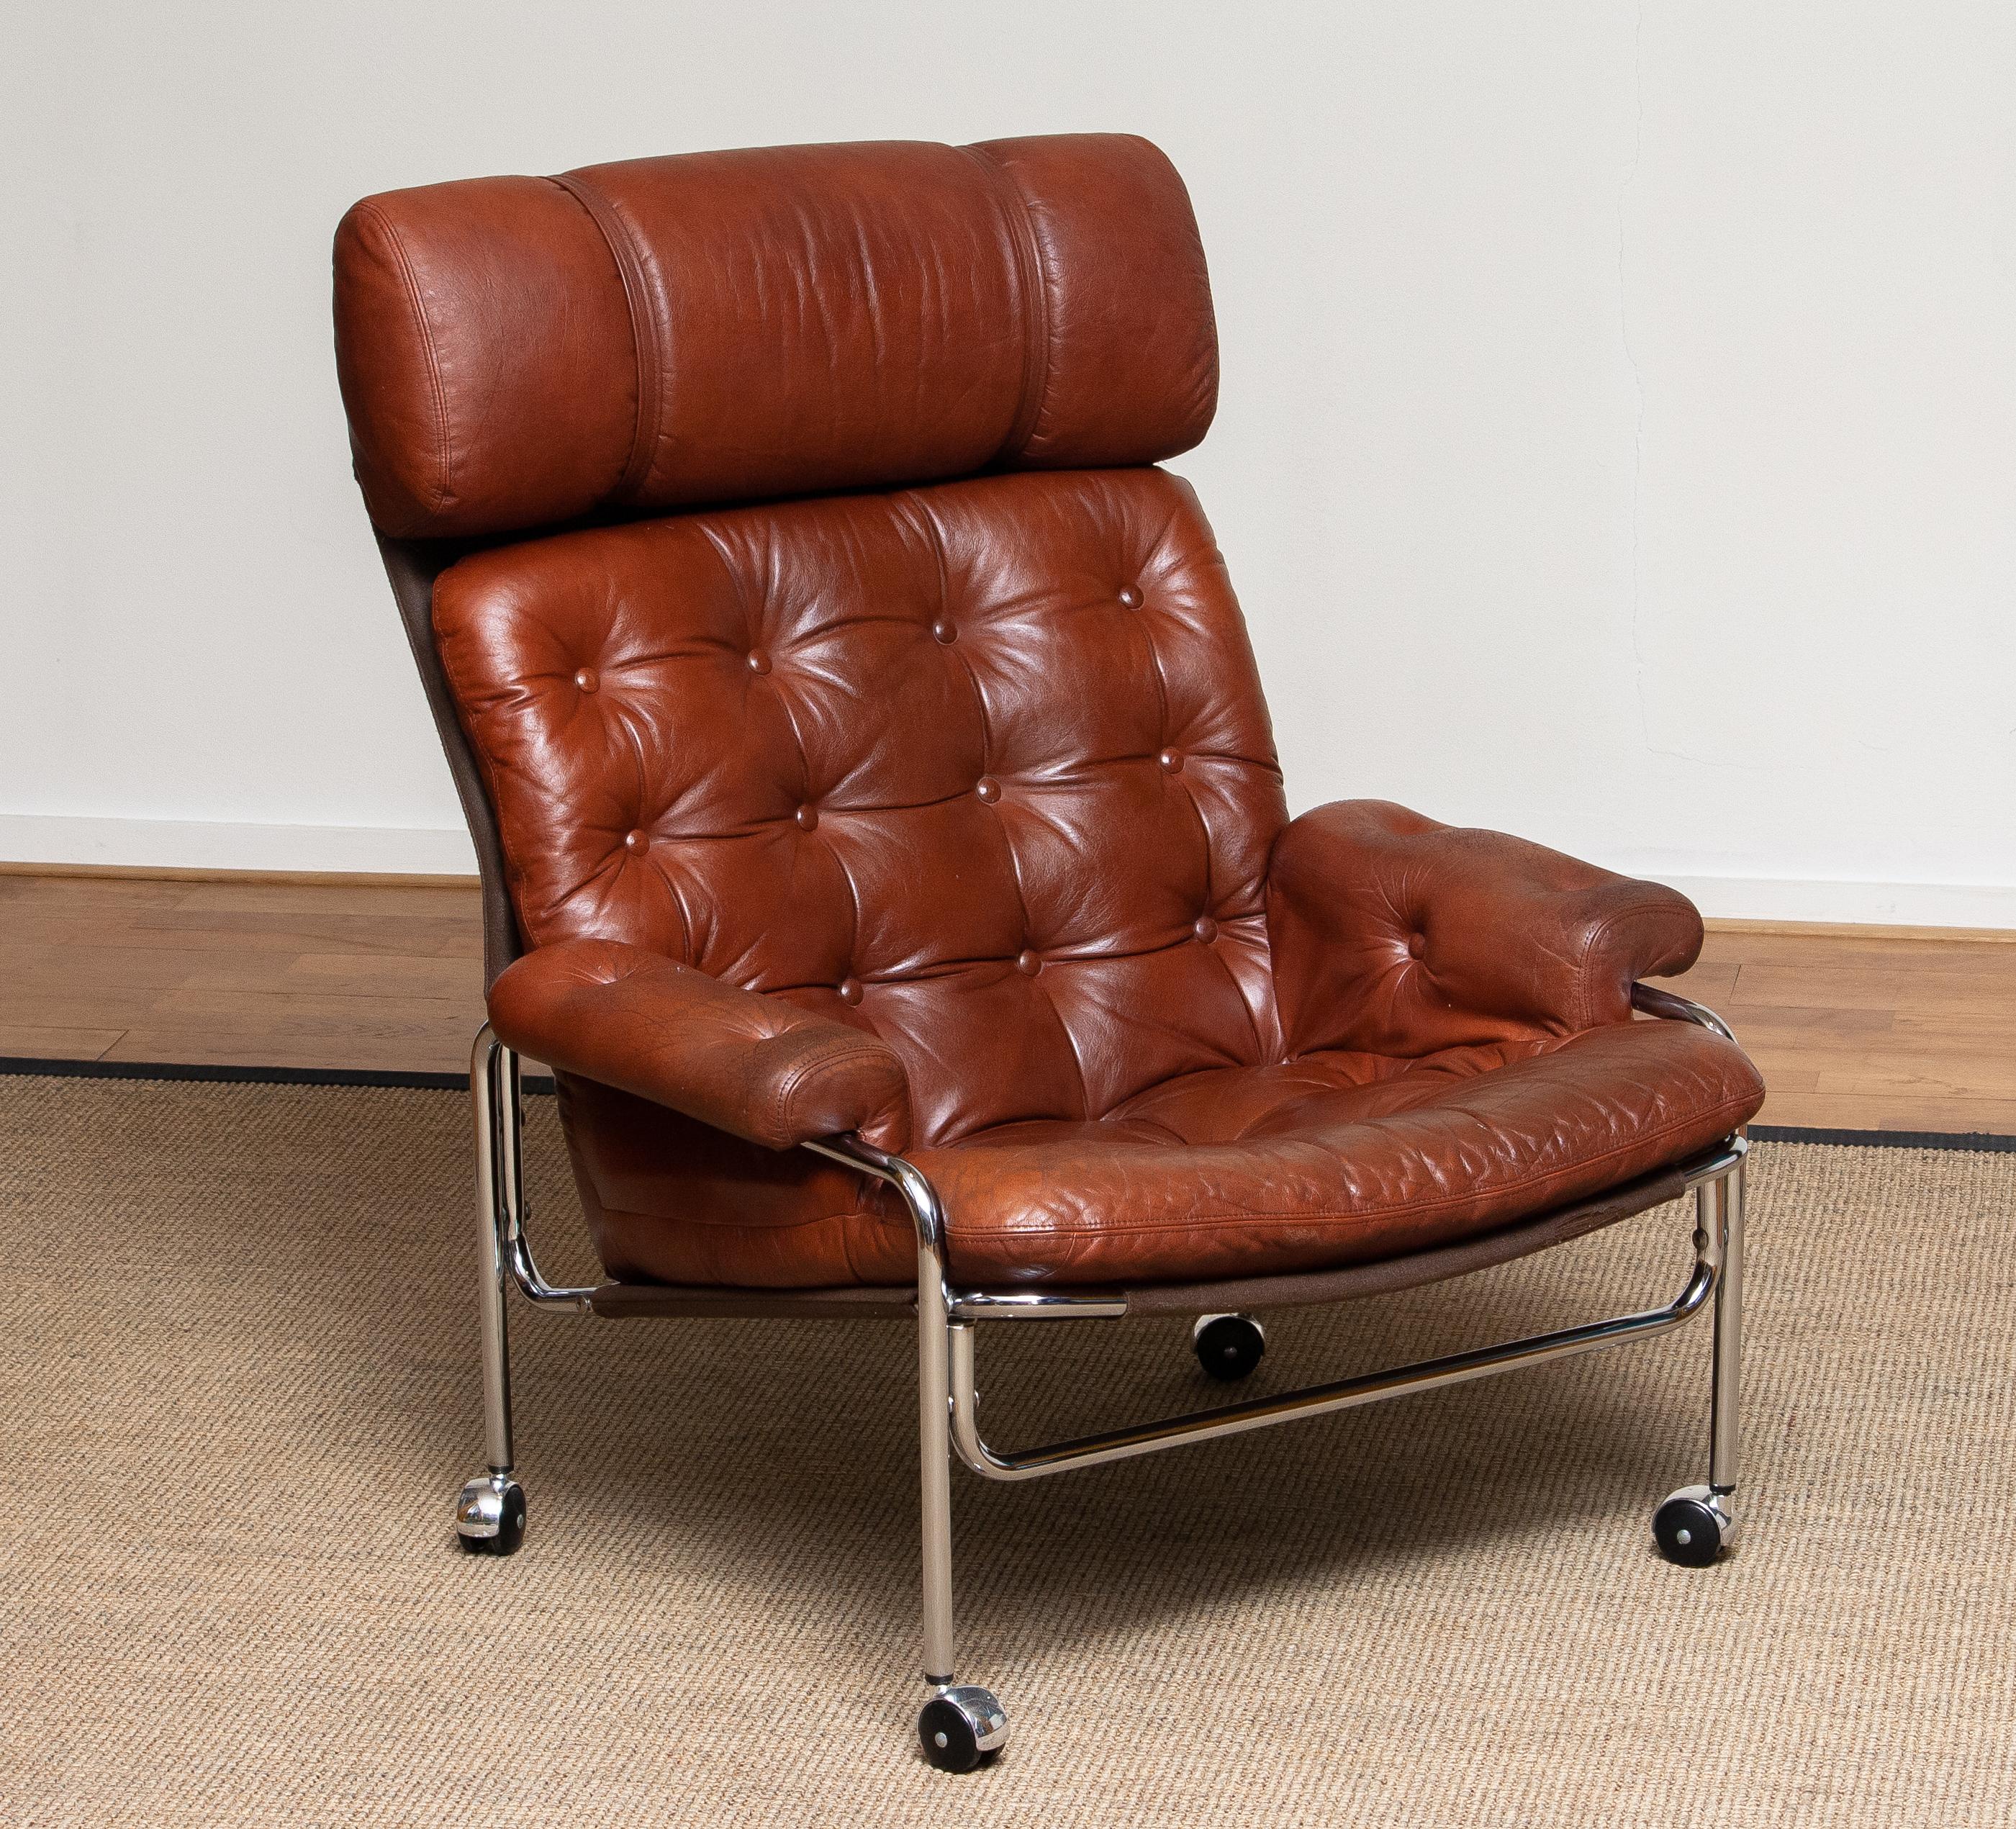 Beautiful lounge / easy chair in aged brown / cognac leather and chrome designed by Pethrus Lindlöfs for A.B. Lindlöfs Möbler Lammhult, Sweden.
The aged leather on the chairs gives the chairs the typical vintage character. The leather is soft and